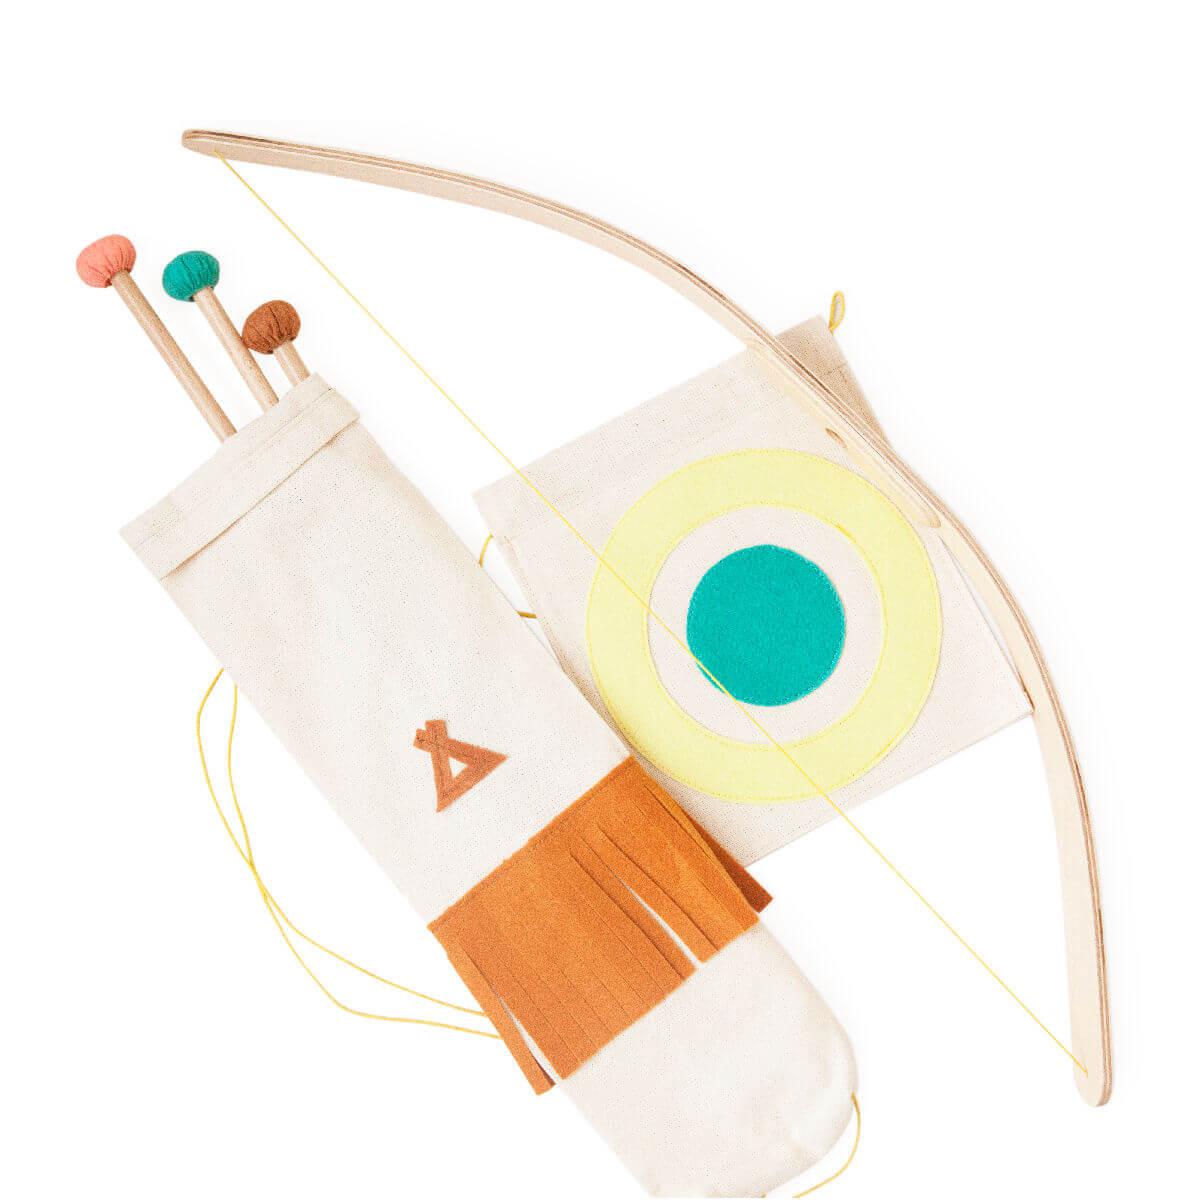 Babai toys bow and arrows activity toys at blue brontide UK